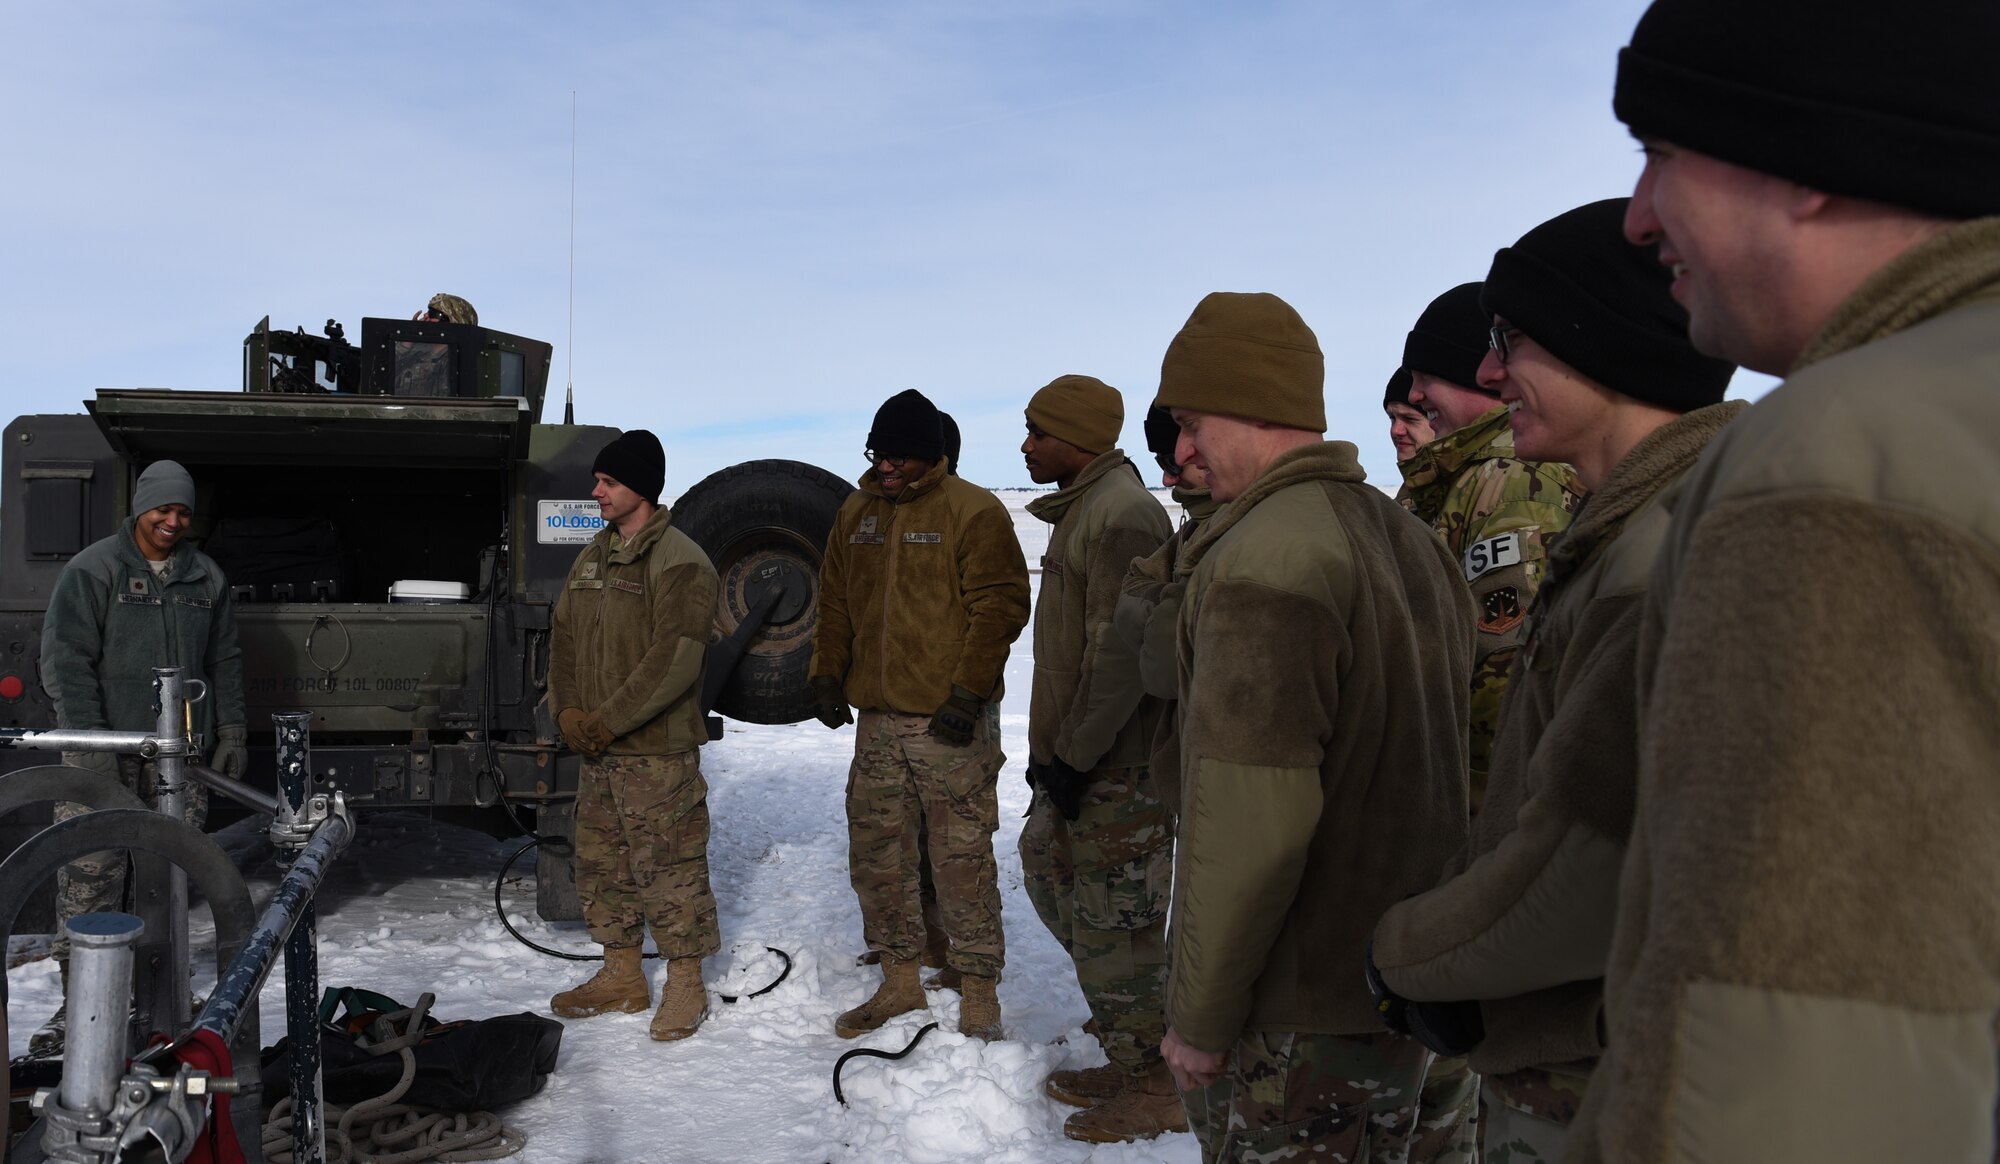 A group of 90th Missile Security Forces defenders listen to an entry brief before going down into a missile launch facility in the F.E. Warren Air Force Base missile complex, Dec. 28, 2017. Members of the 90th Missile Security Forces Squadron got the chance to go into a missile launch facility to see what they protect every day.